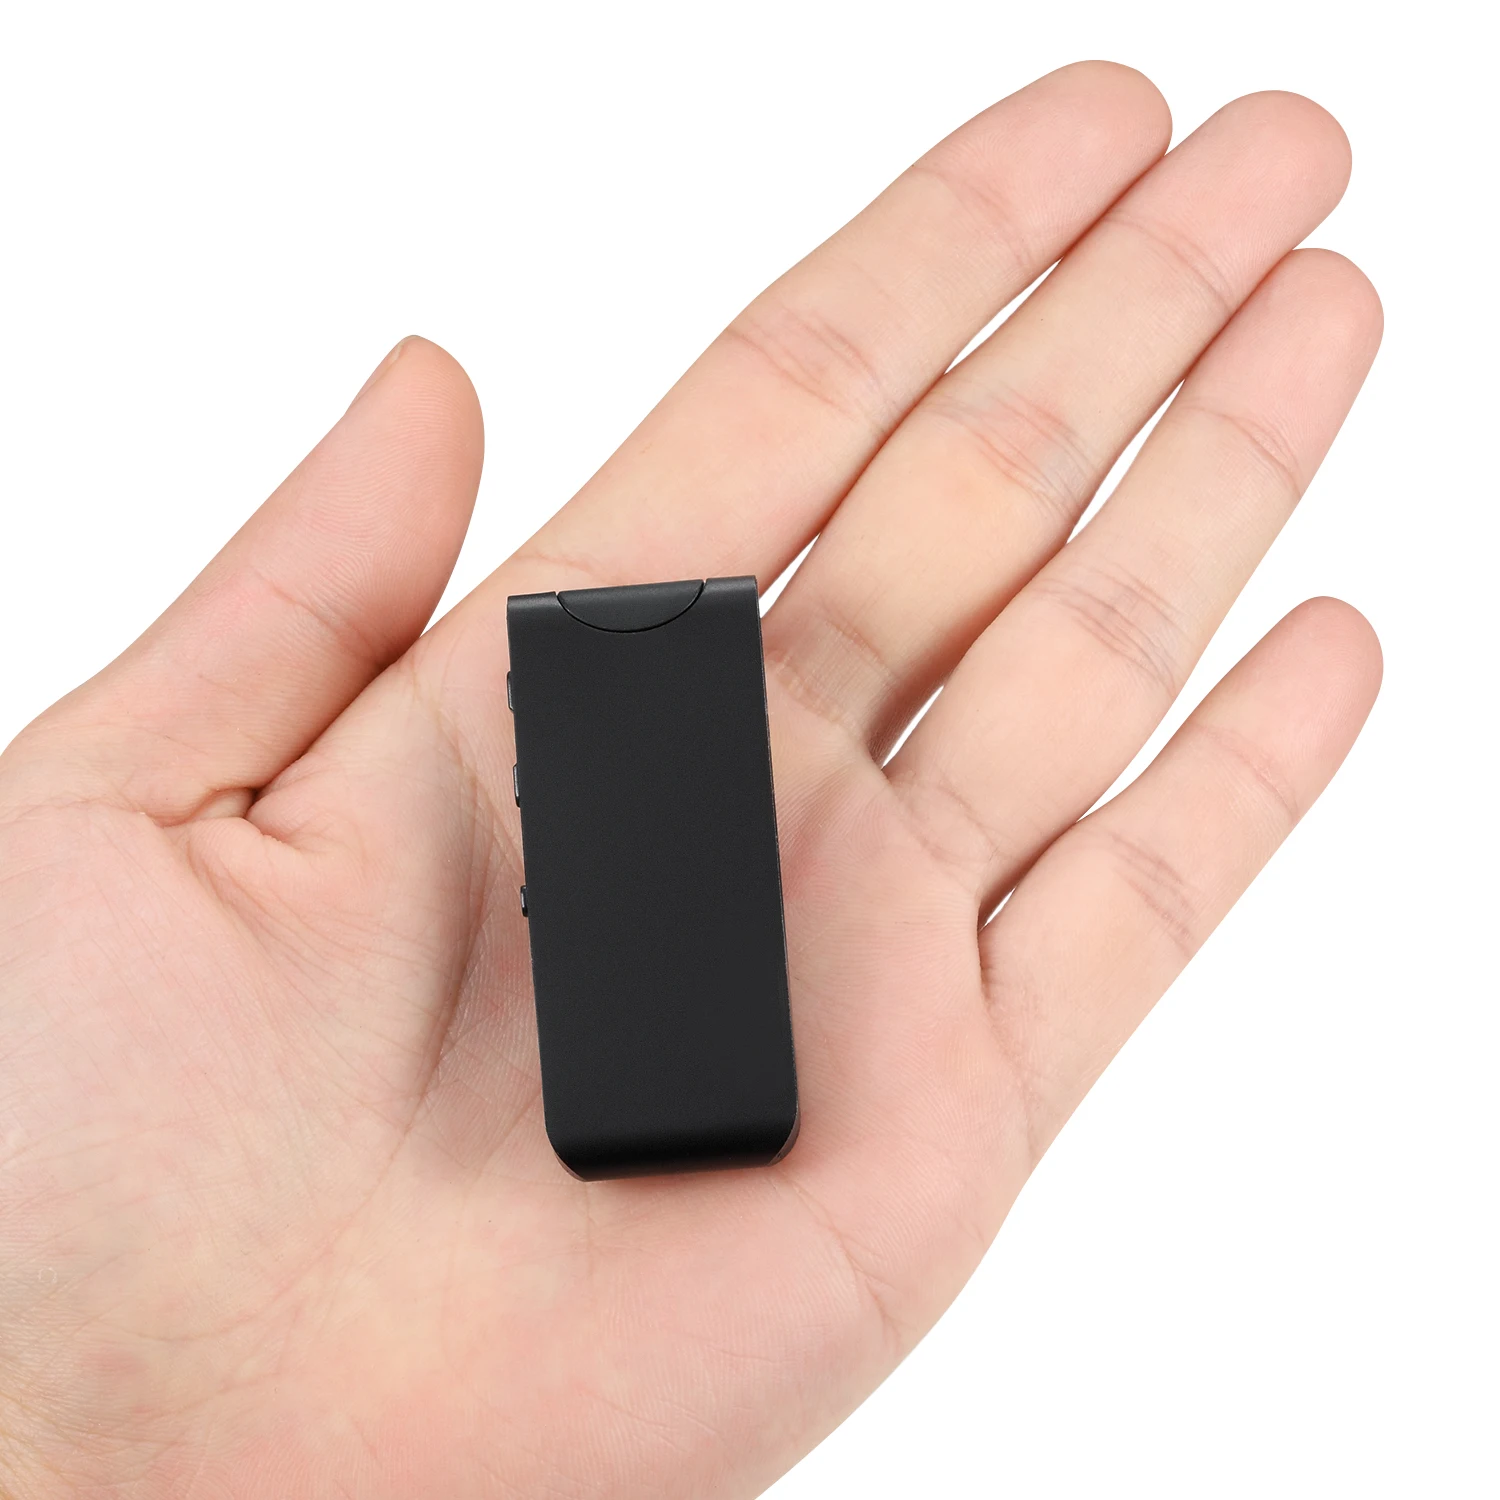 product-Hnsat-Keychain Voice Recorder Device Mp3 Player USB Flash Drives Tiny Hidden Recording Devic-1